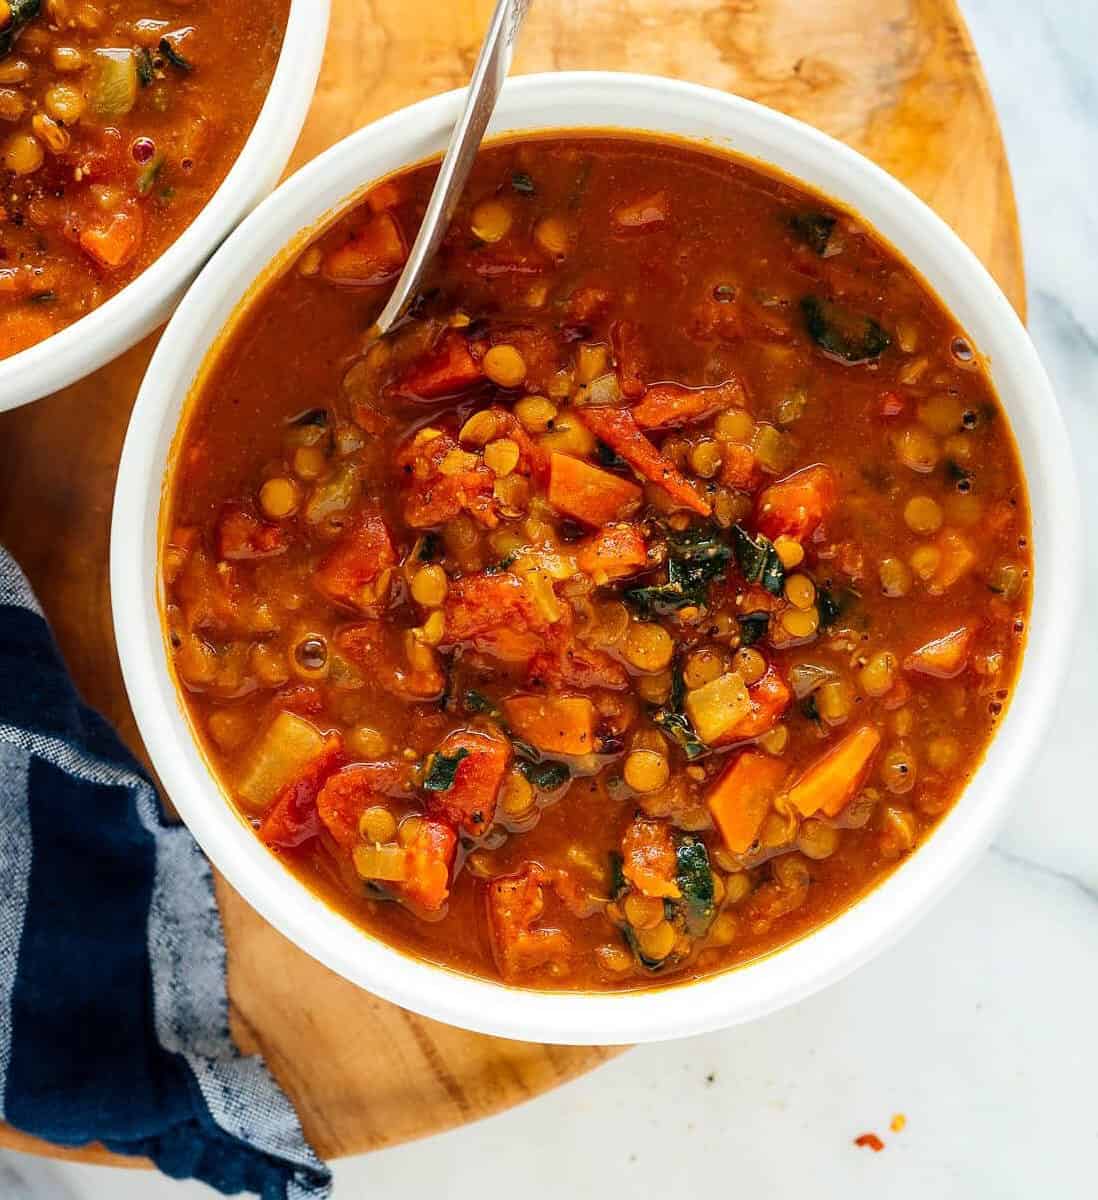  This vegetarian soup is a great source of protein and fiber.